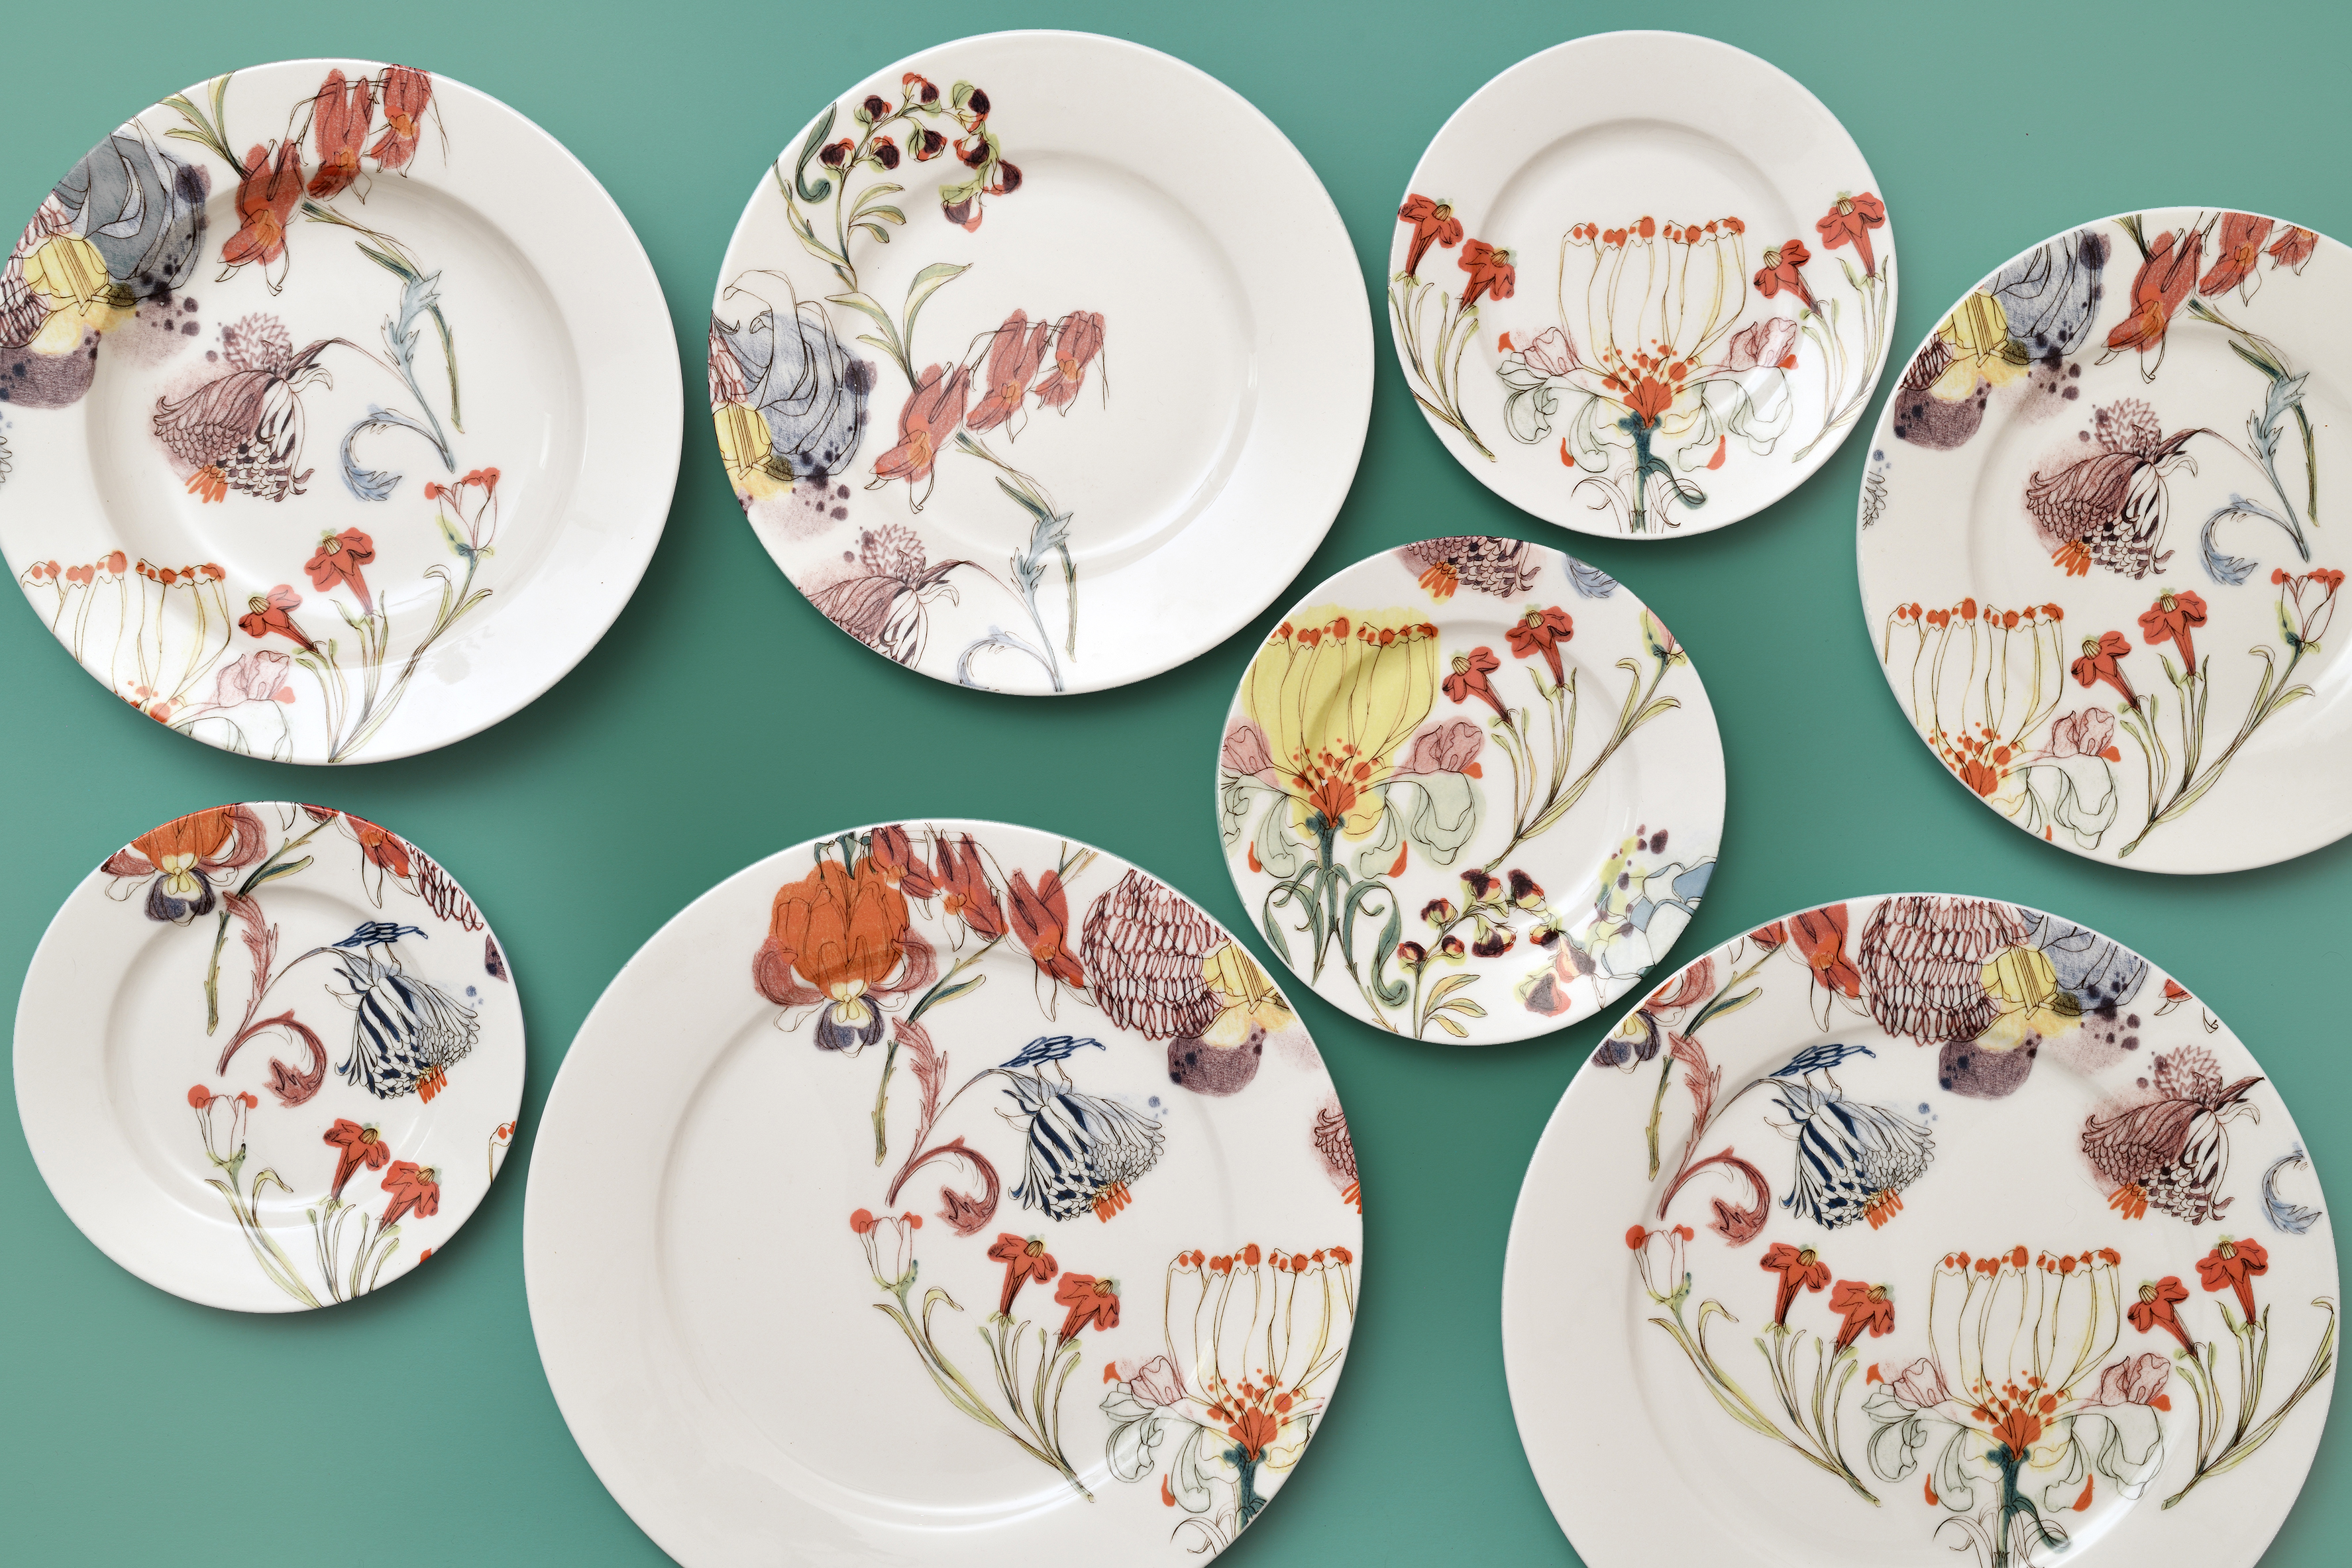 Francesca Colombo - the grandama's garden - flowers - colourfull - made in Italy - porcelain handpainted - contemporary - ornamental - wallpapers - contemporary - modern - decor - luxury - watercolours - soft colours